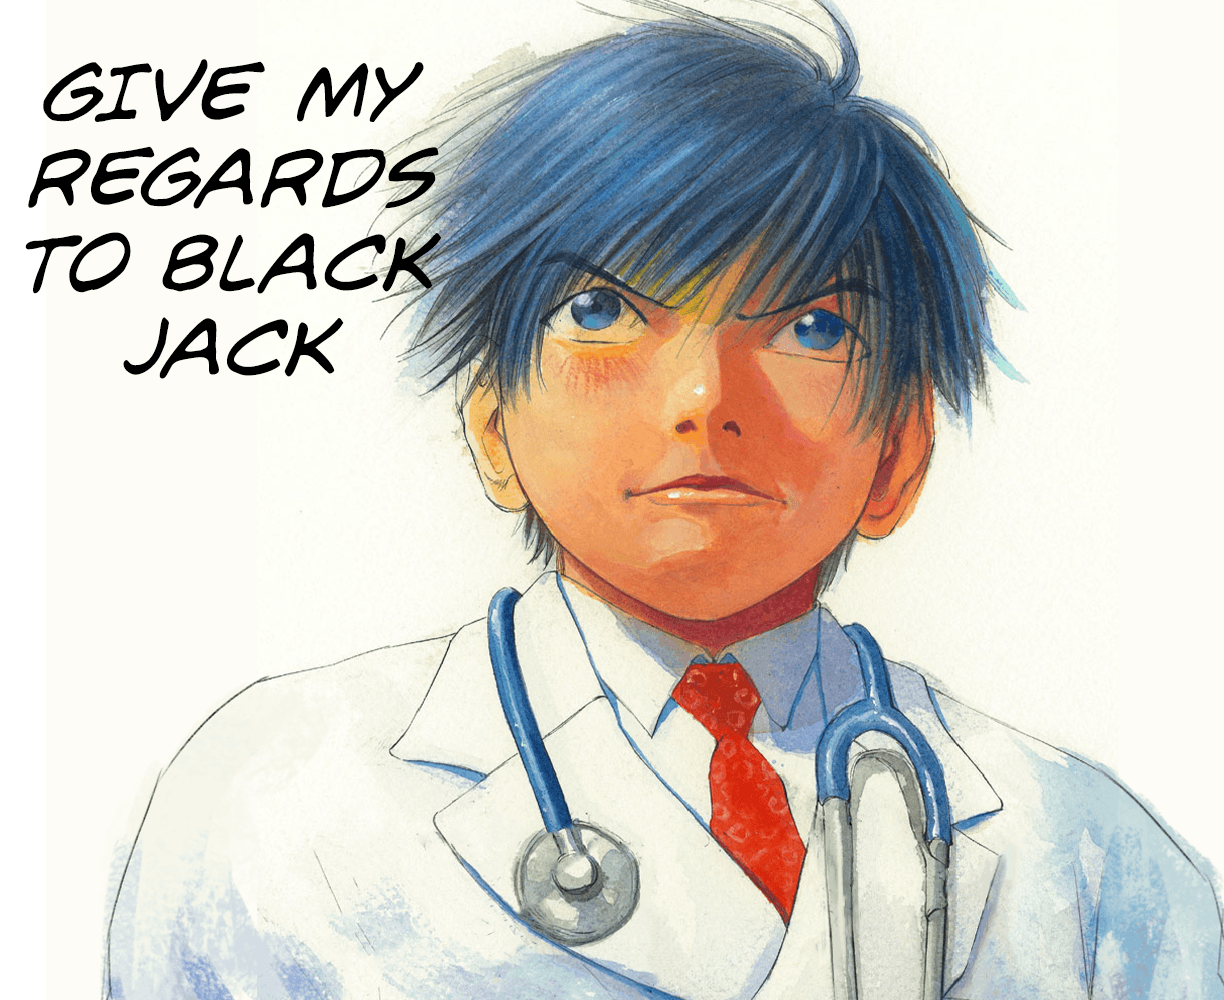 The cover art for the episode One Postcard, One Message from the comics series Give My Regards to Black Jack, which is number 52 in the series